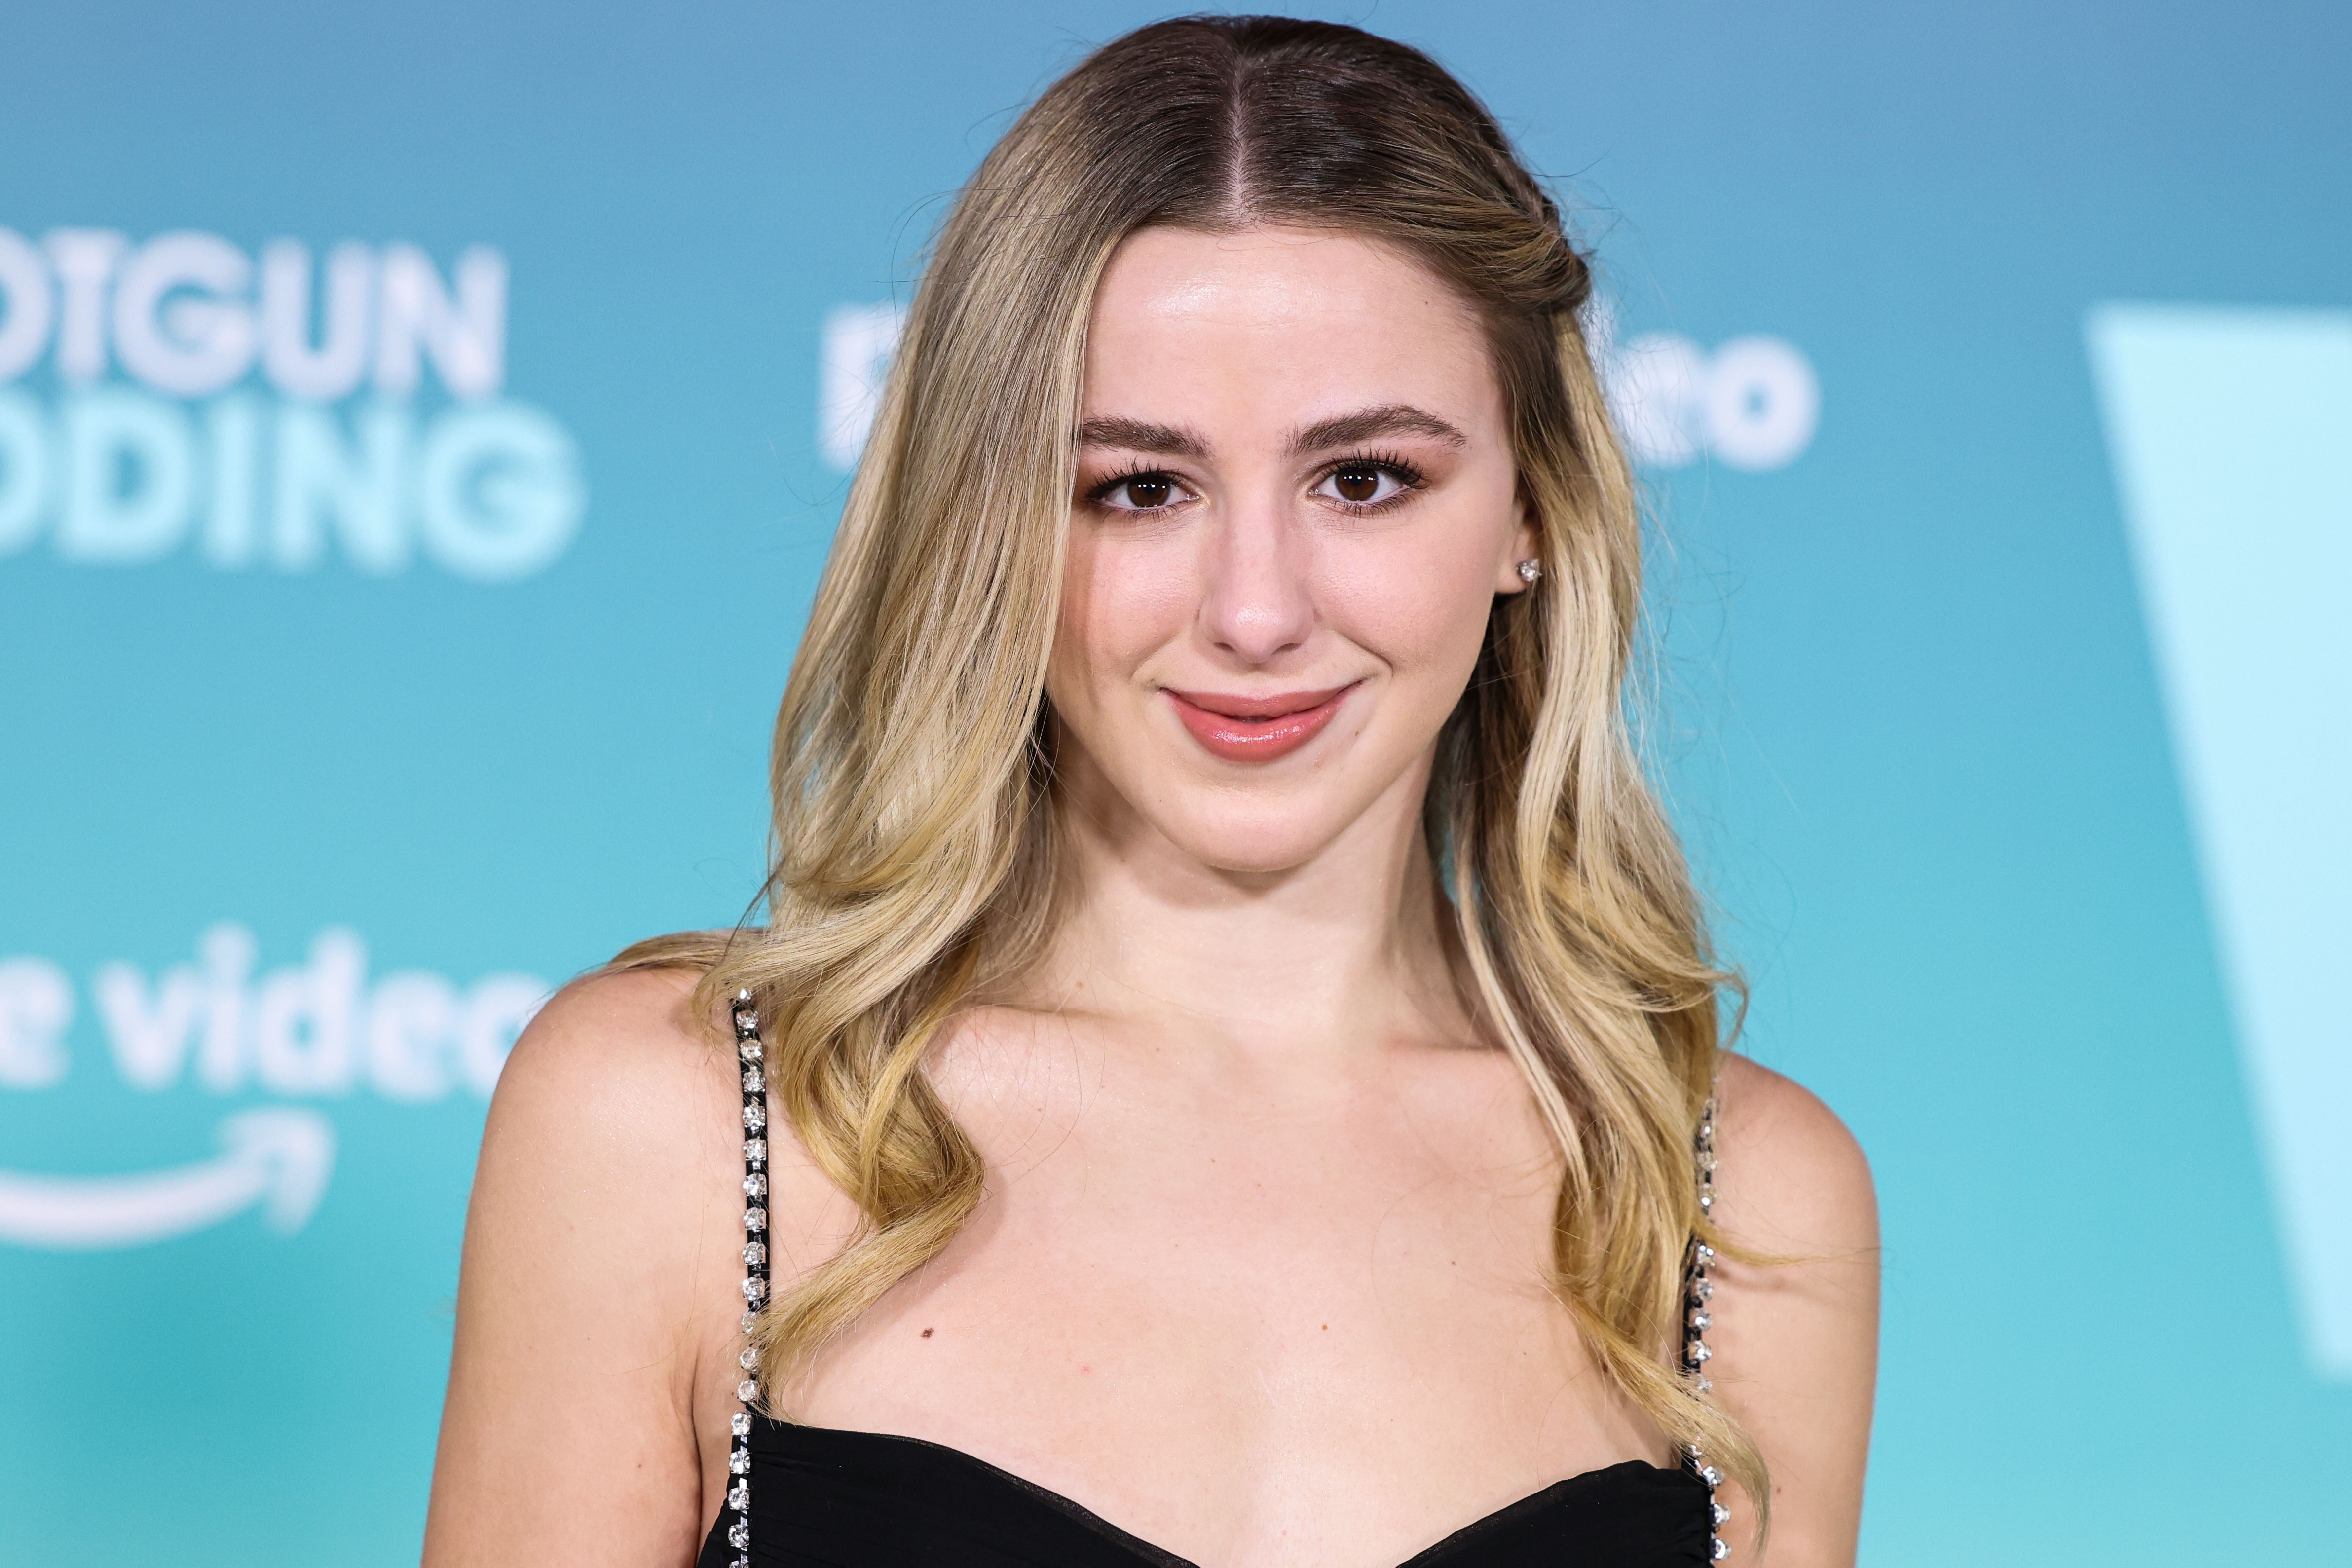 Chloe Lukasiak What Has She Been Up to Since 'Dance Moms'?